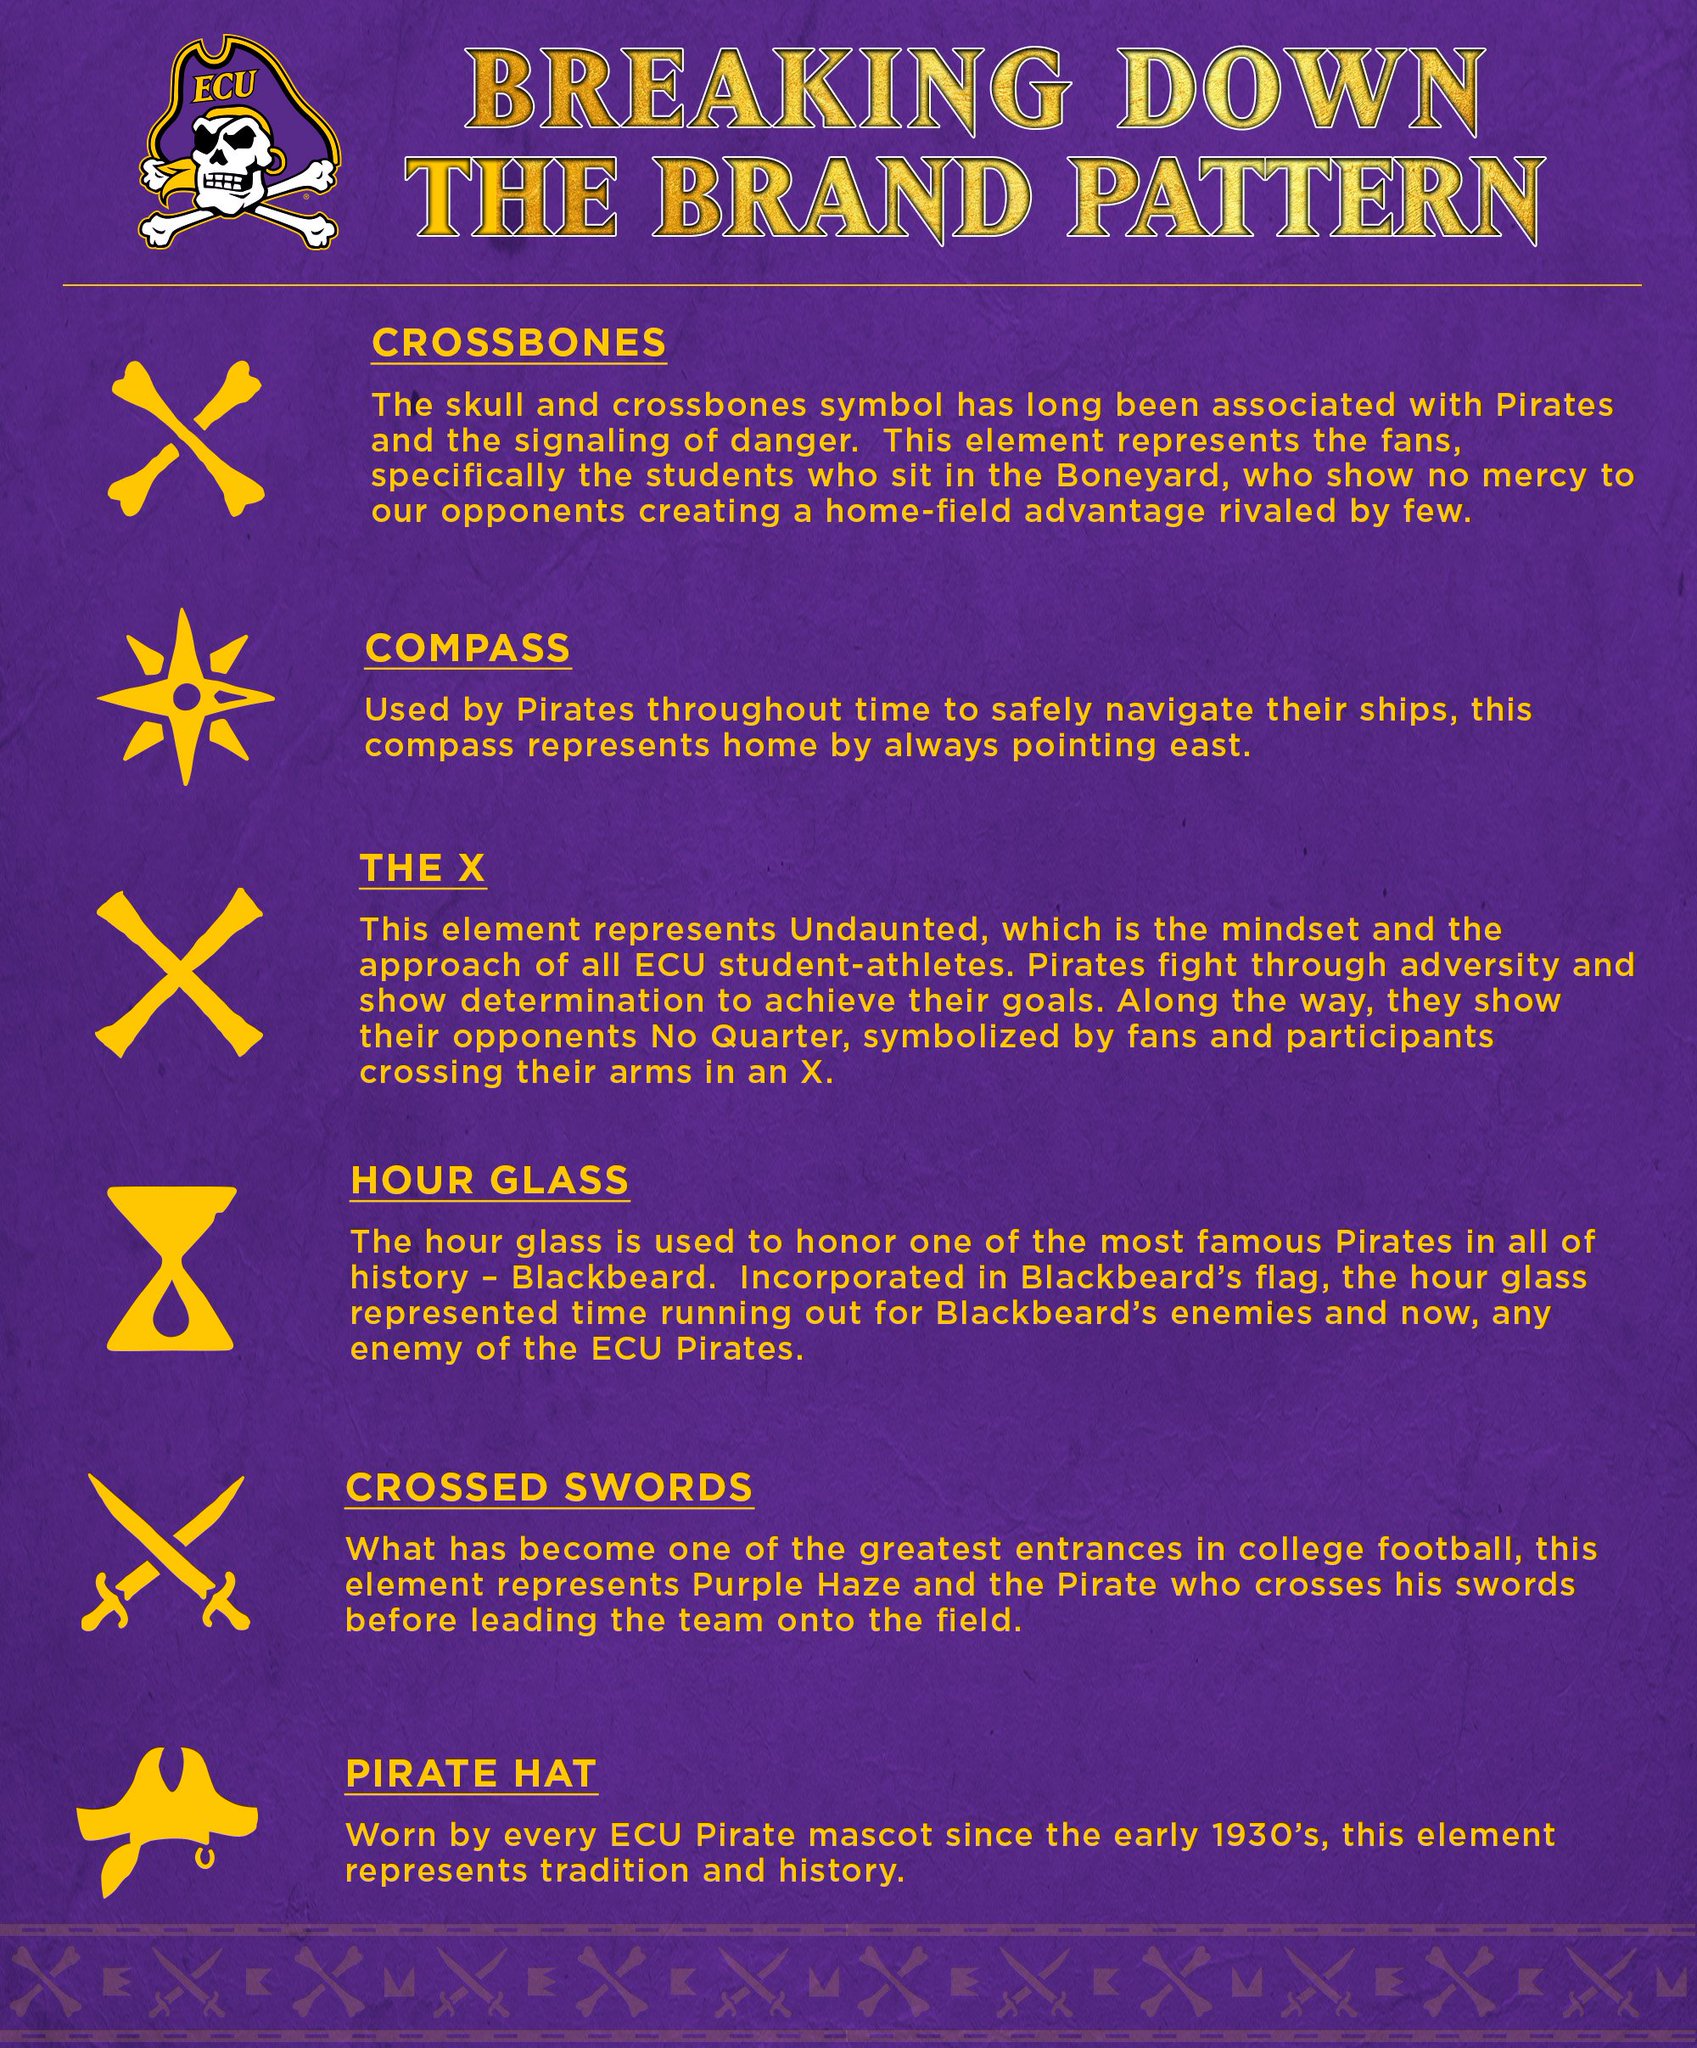 East Carolina Pirates on X: No Quarter. Undaunted, The Boneyard. Purple  Haze. This place is special, and our new brand pattern represents  everything that makes ECU what we are. #LoyalAndBold   /